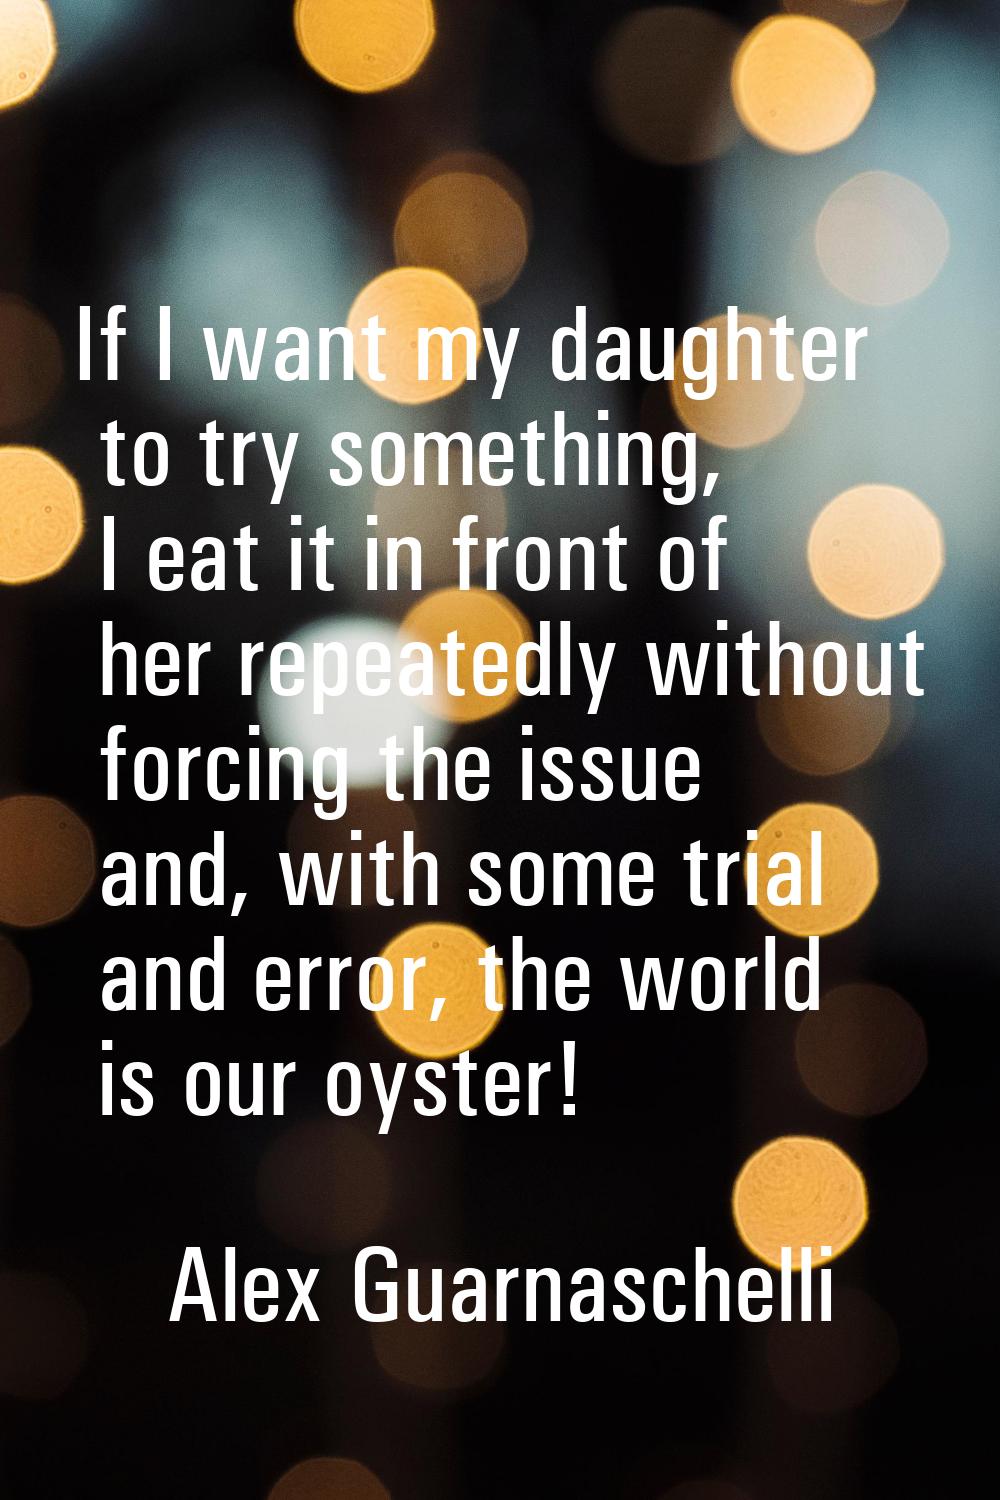 If I want my daughter to try something, I eat it in front of her repeatedly without forcing the iss